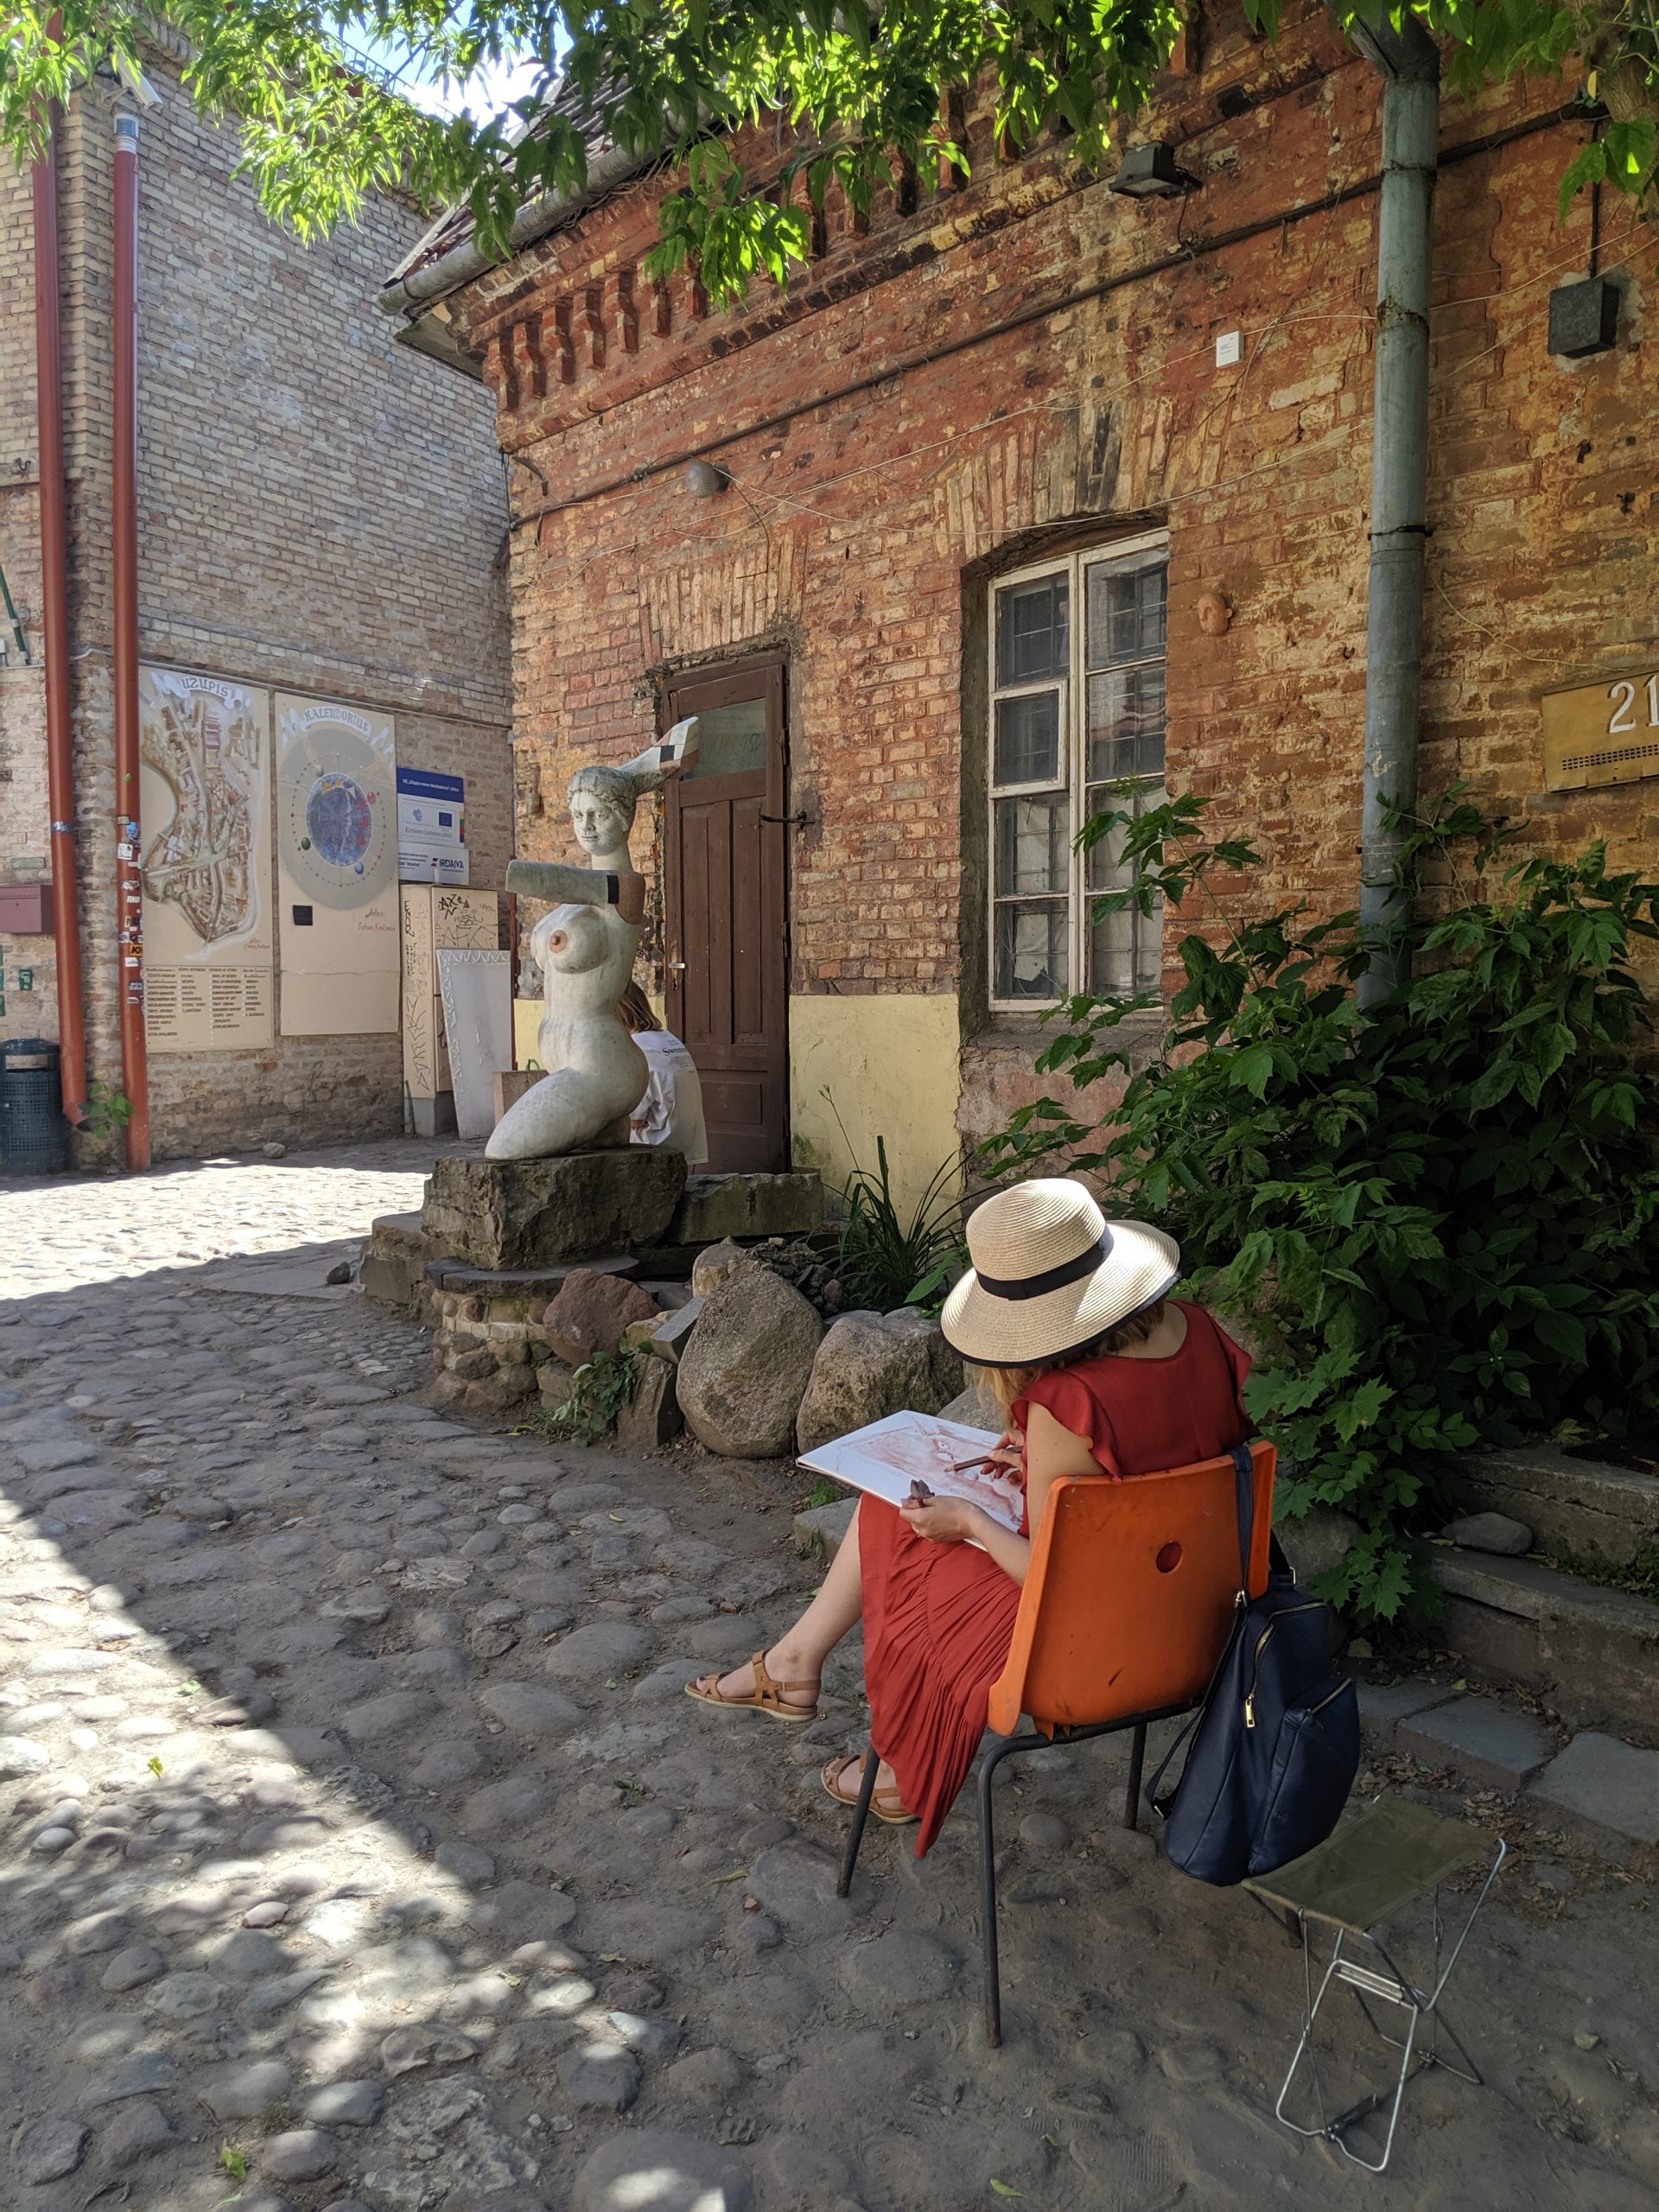 An artist sitting on a chair and drawing in Vilnius Lithuania.